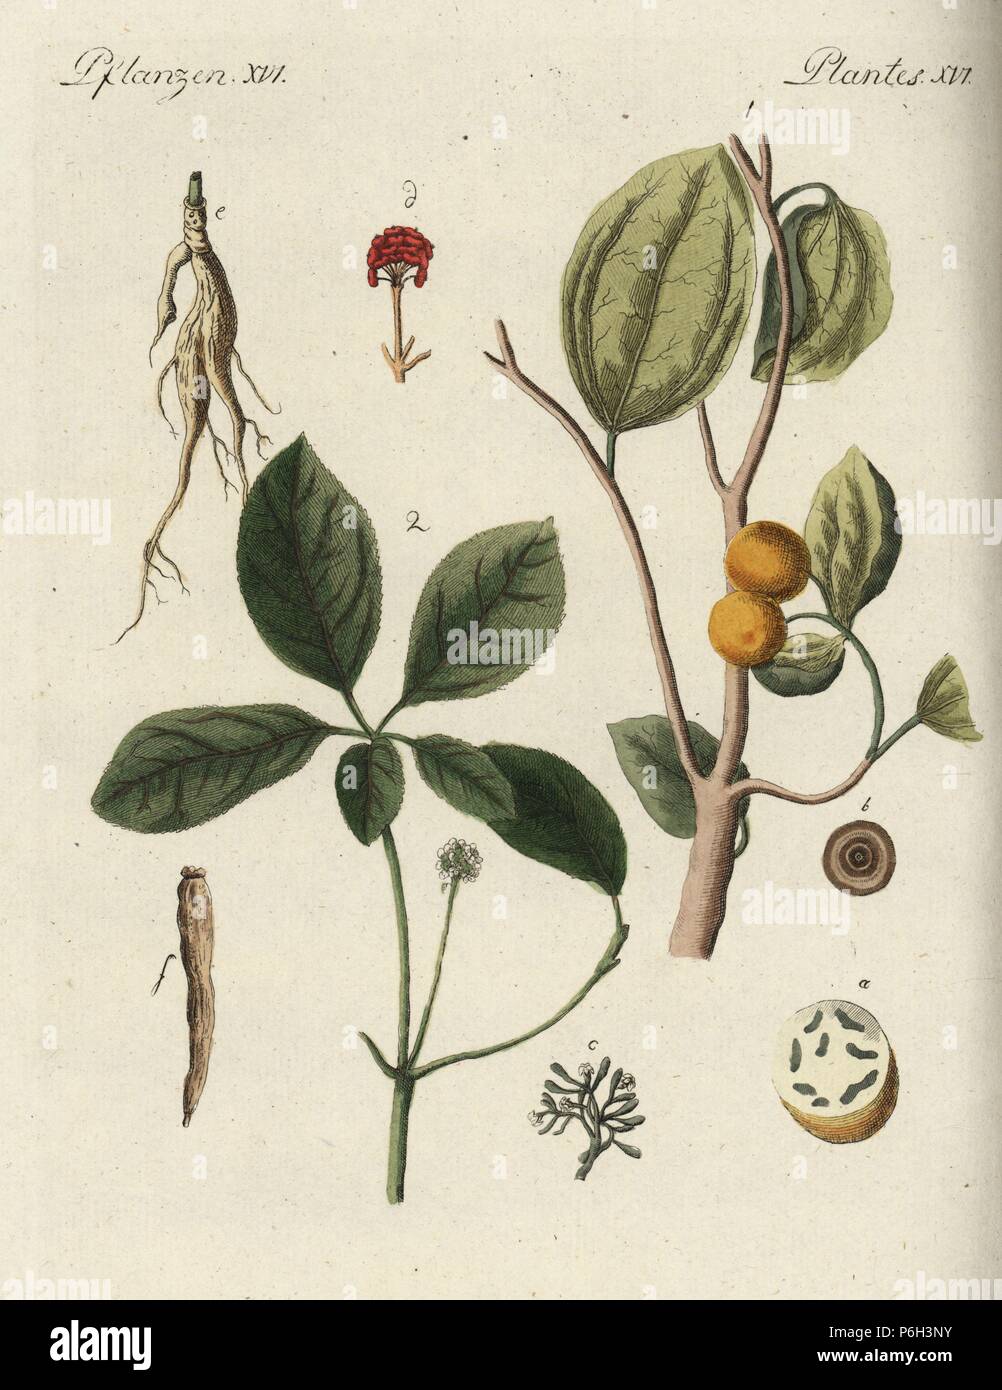 Strychnine tree, Strychnos nux-vomica 1, with fruit in section a, grain b, flower c, and ginseng, Panax quinquefolius 2, with flower d, root e, dried root f. Handcoloured copperplate engraving from Friedrich Johann Bertuch's Bilderbuch fur Kinder (Picture Book for Children), Weimar, 1792. Stock Photo